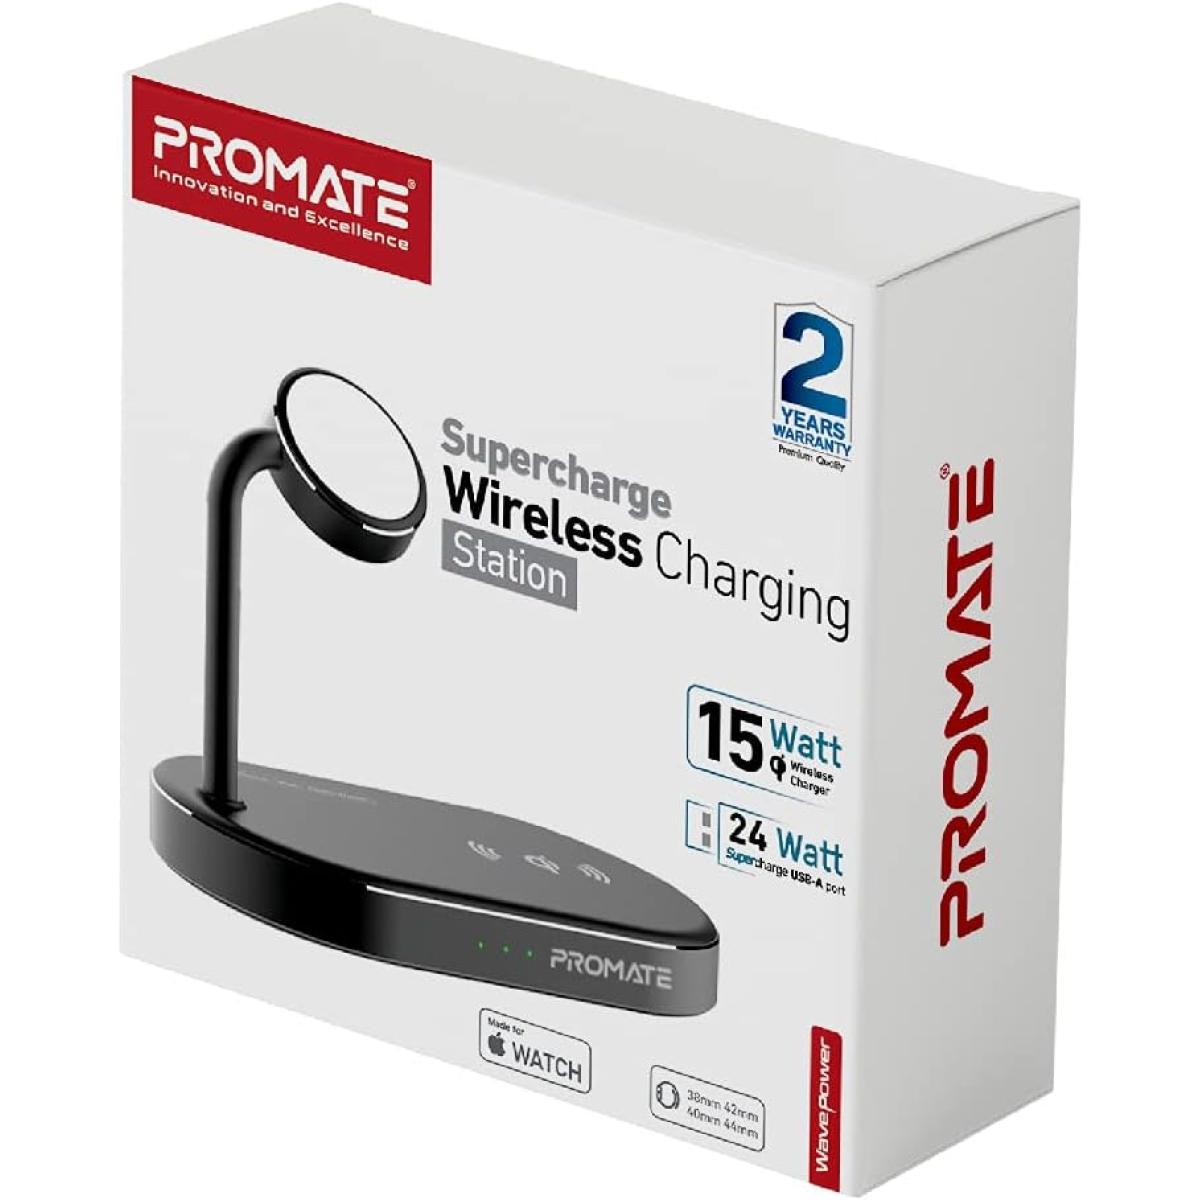 PROMATE Supercharge wireless Charging station